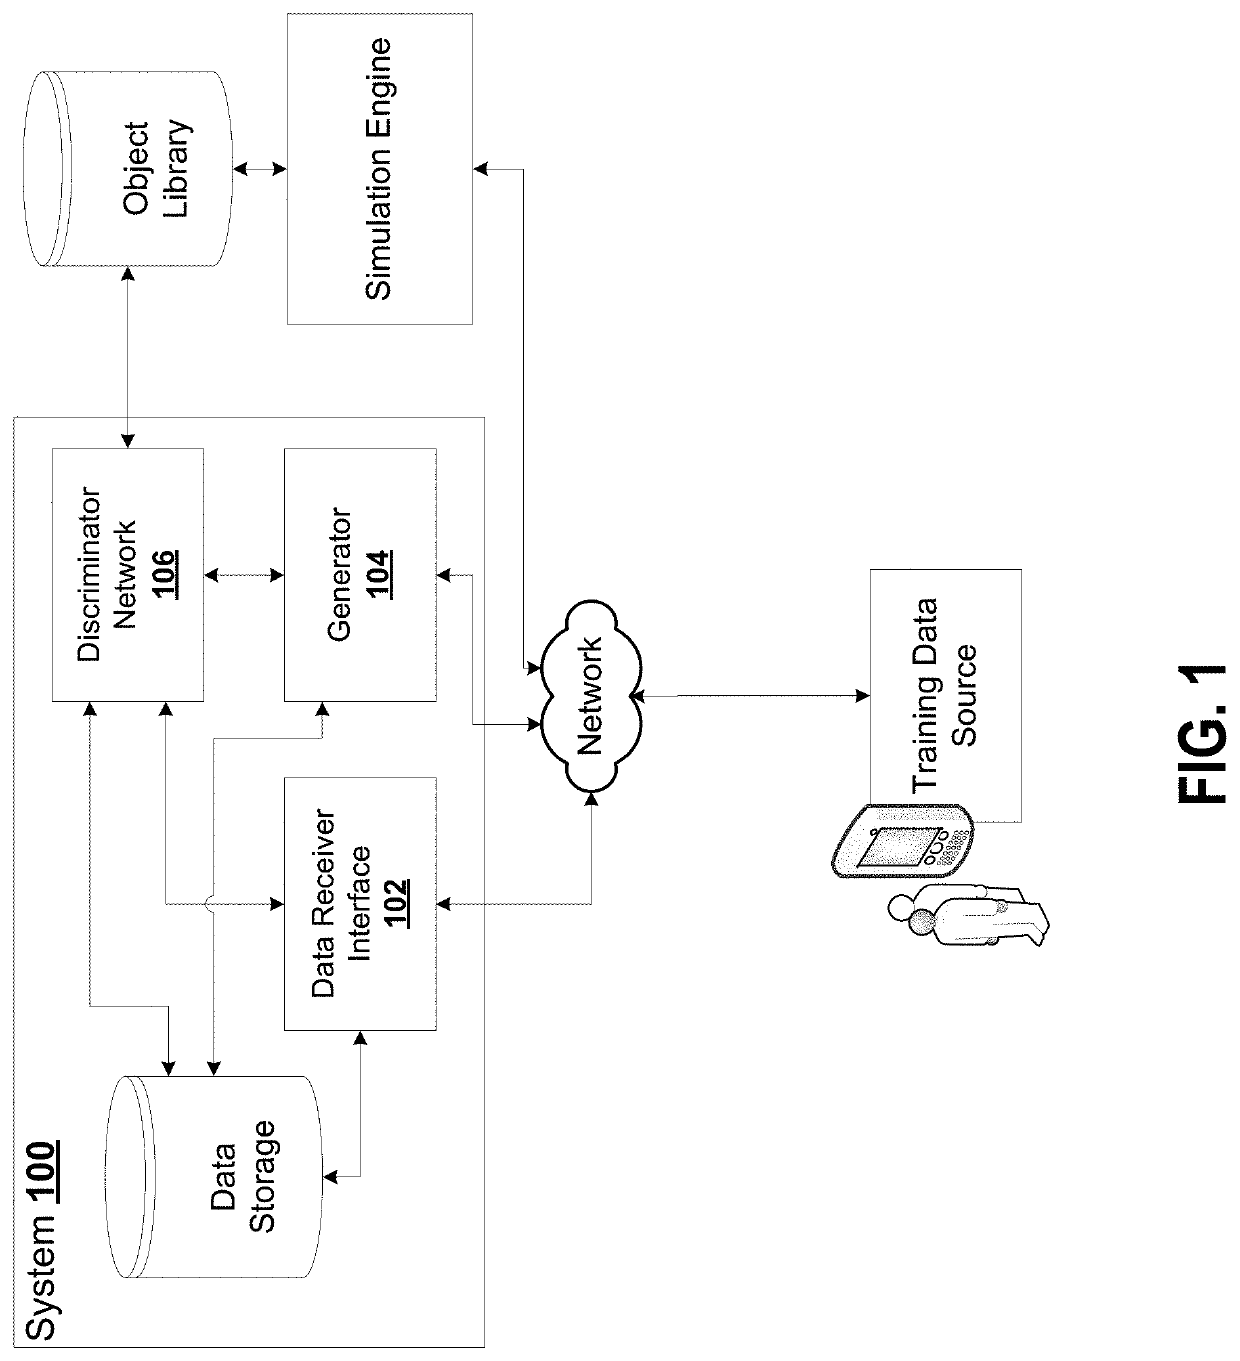 System and method for generation of unseen composite data objects